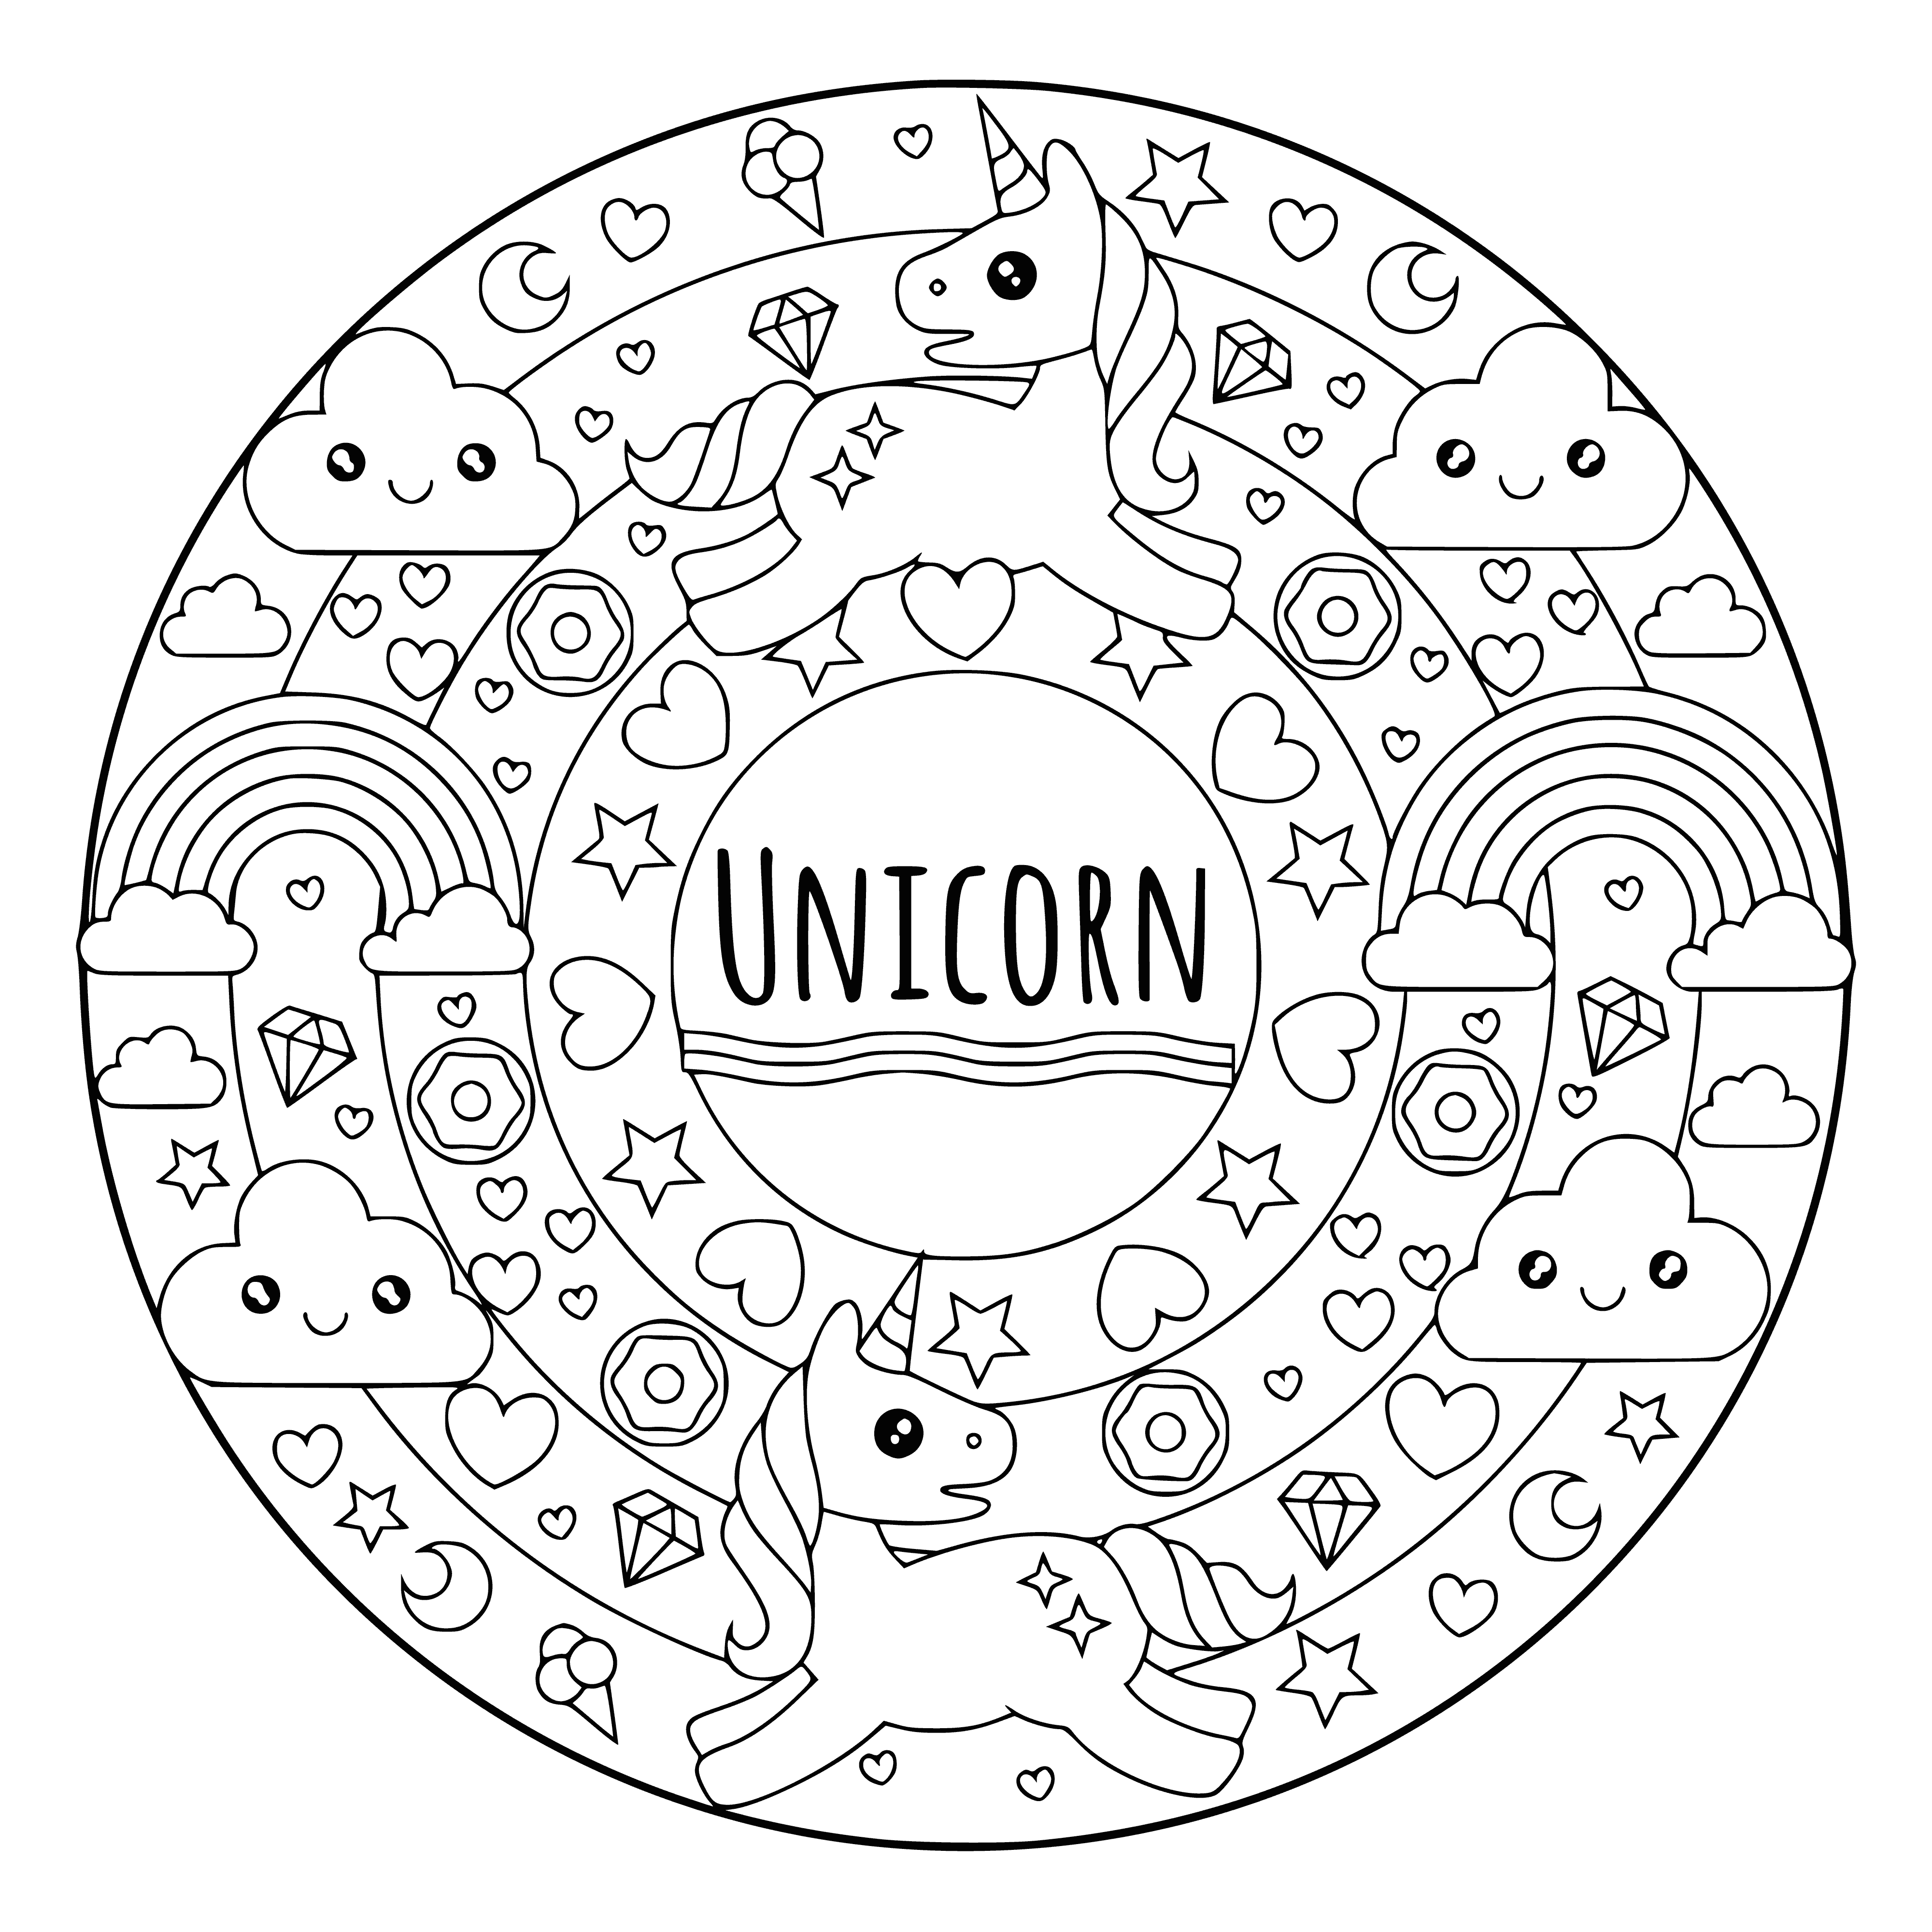 coloring page: Mandala w/ unicorn in center- flowing mane/tail, horn on forehead; geom. pattern w/ stars & hearts.